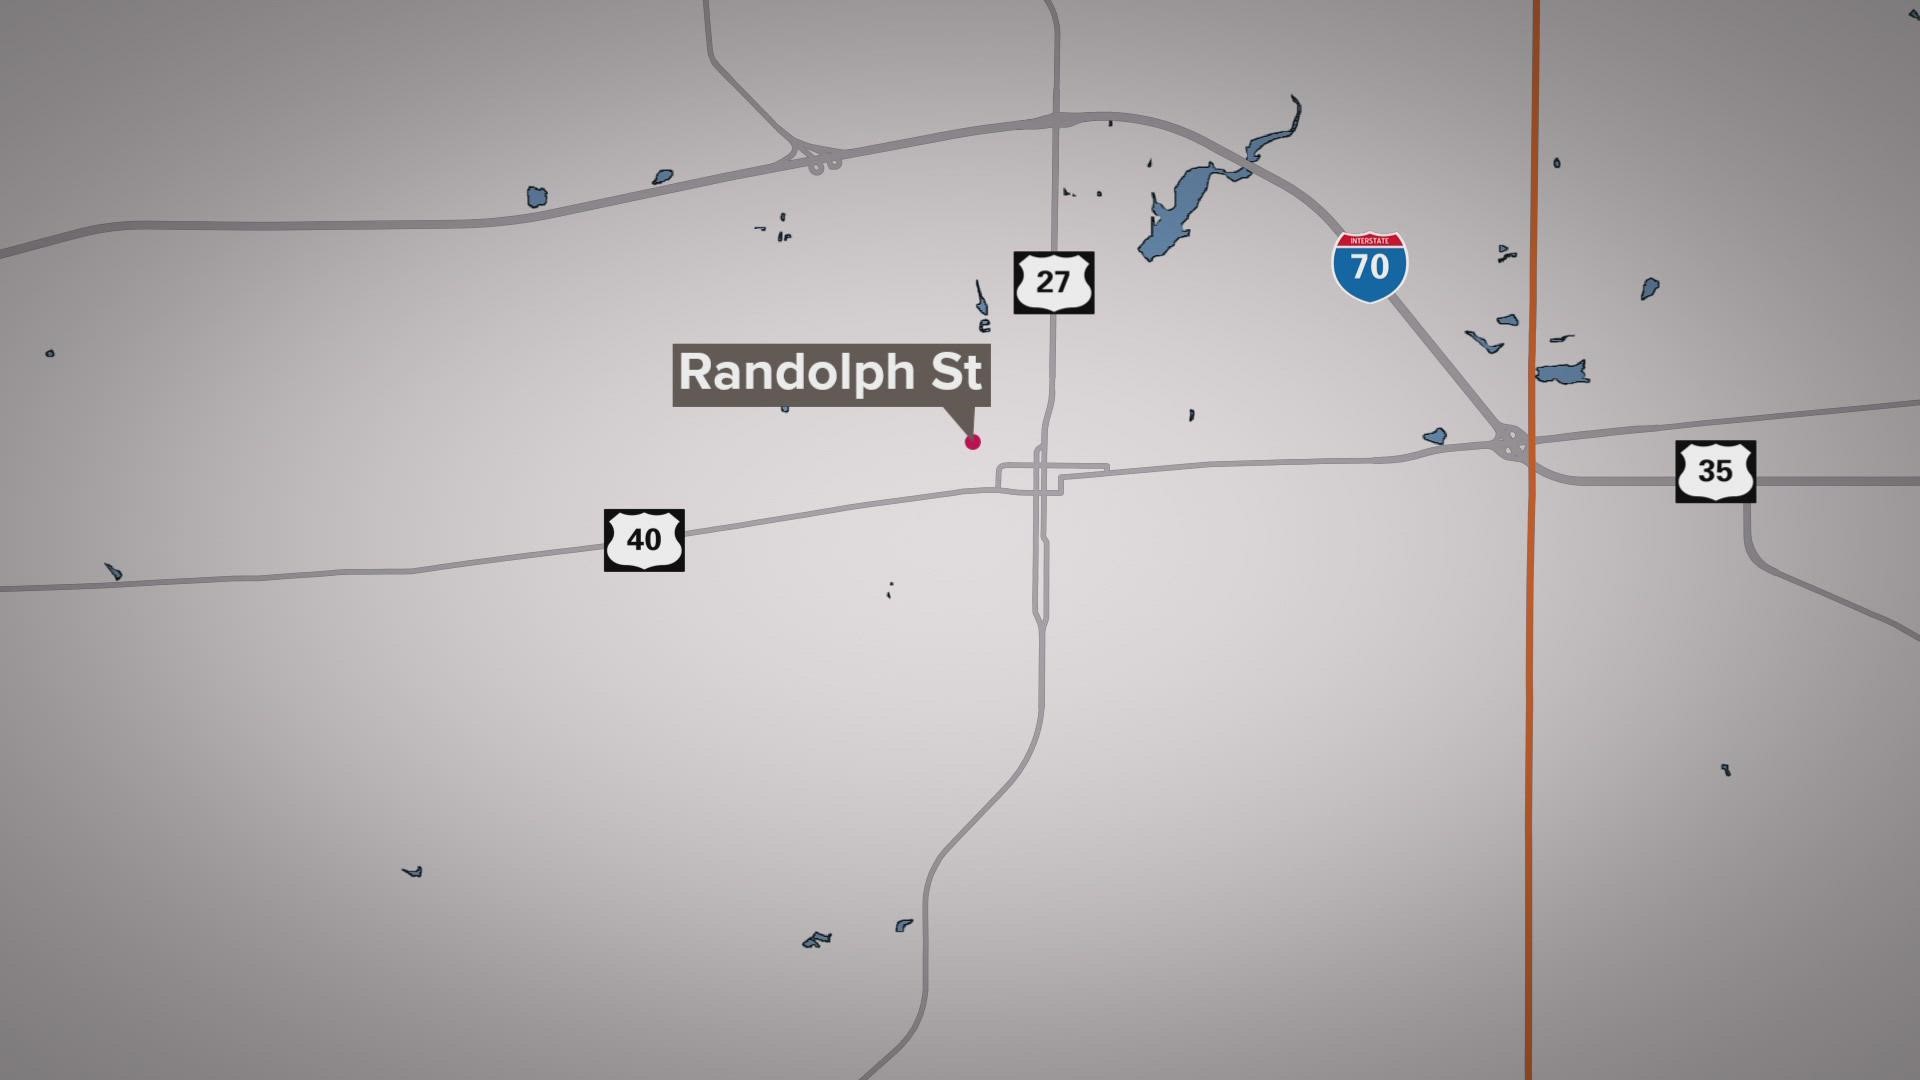 Police said 42-year-old Brandy Jo Fox, of Richmond, died in the shooting.